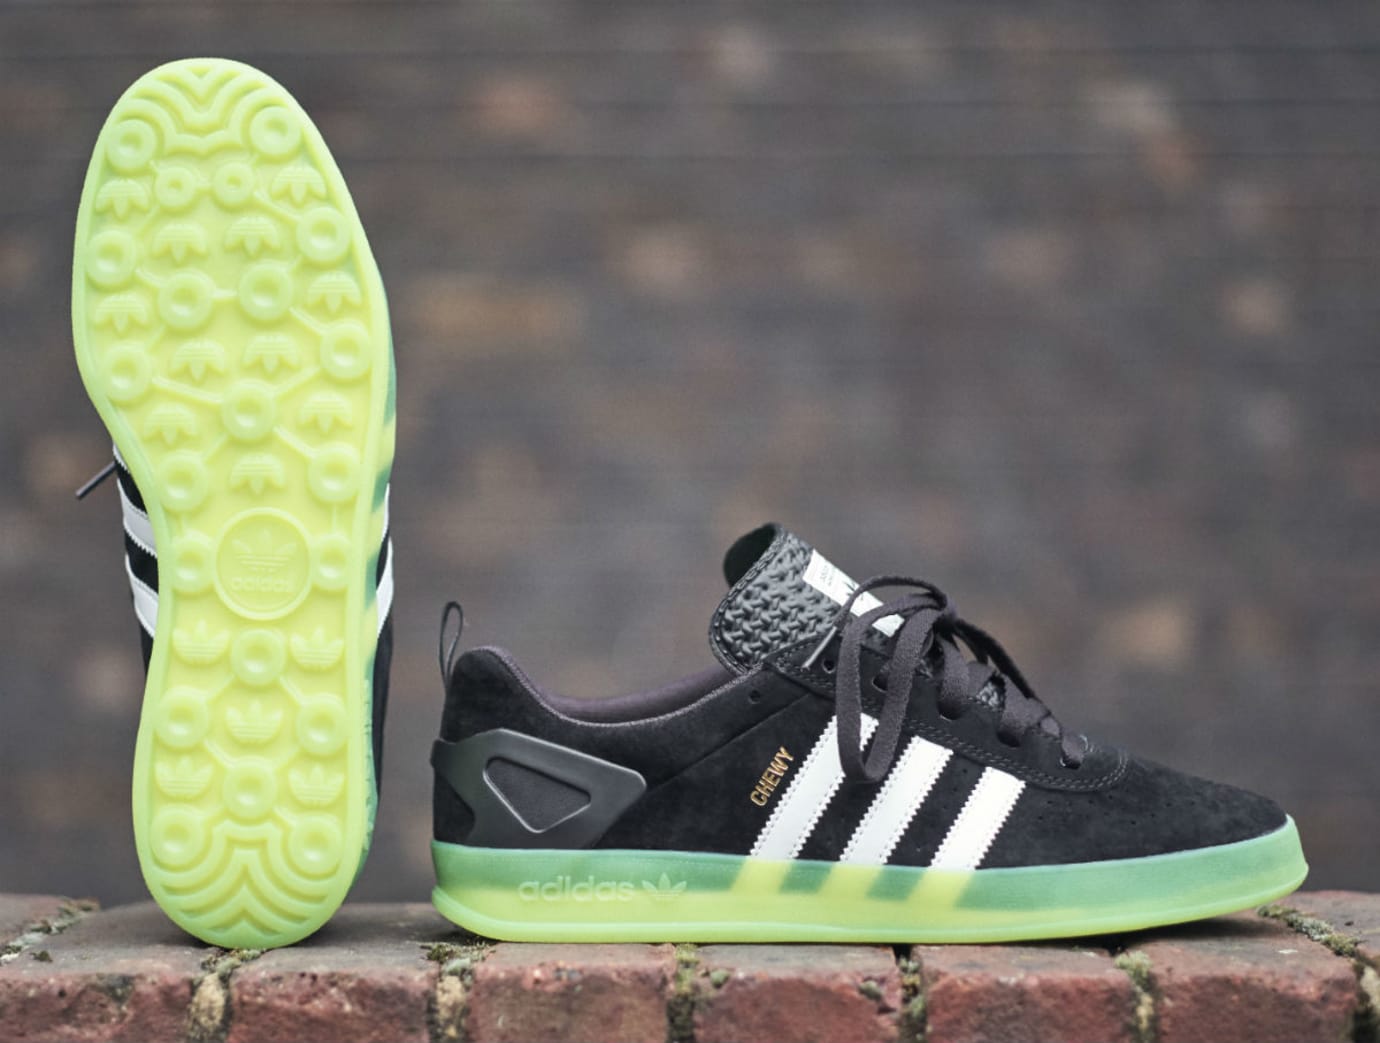 Adidas Palace Pro Chewy Cannon Release Date (4)